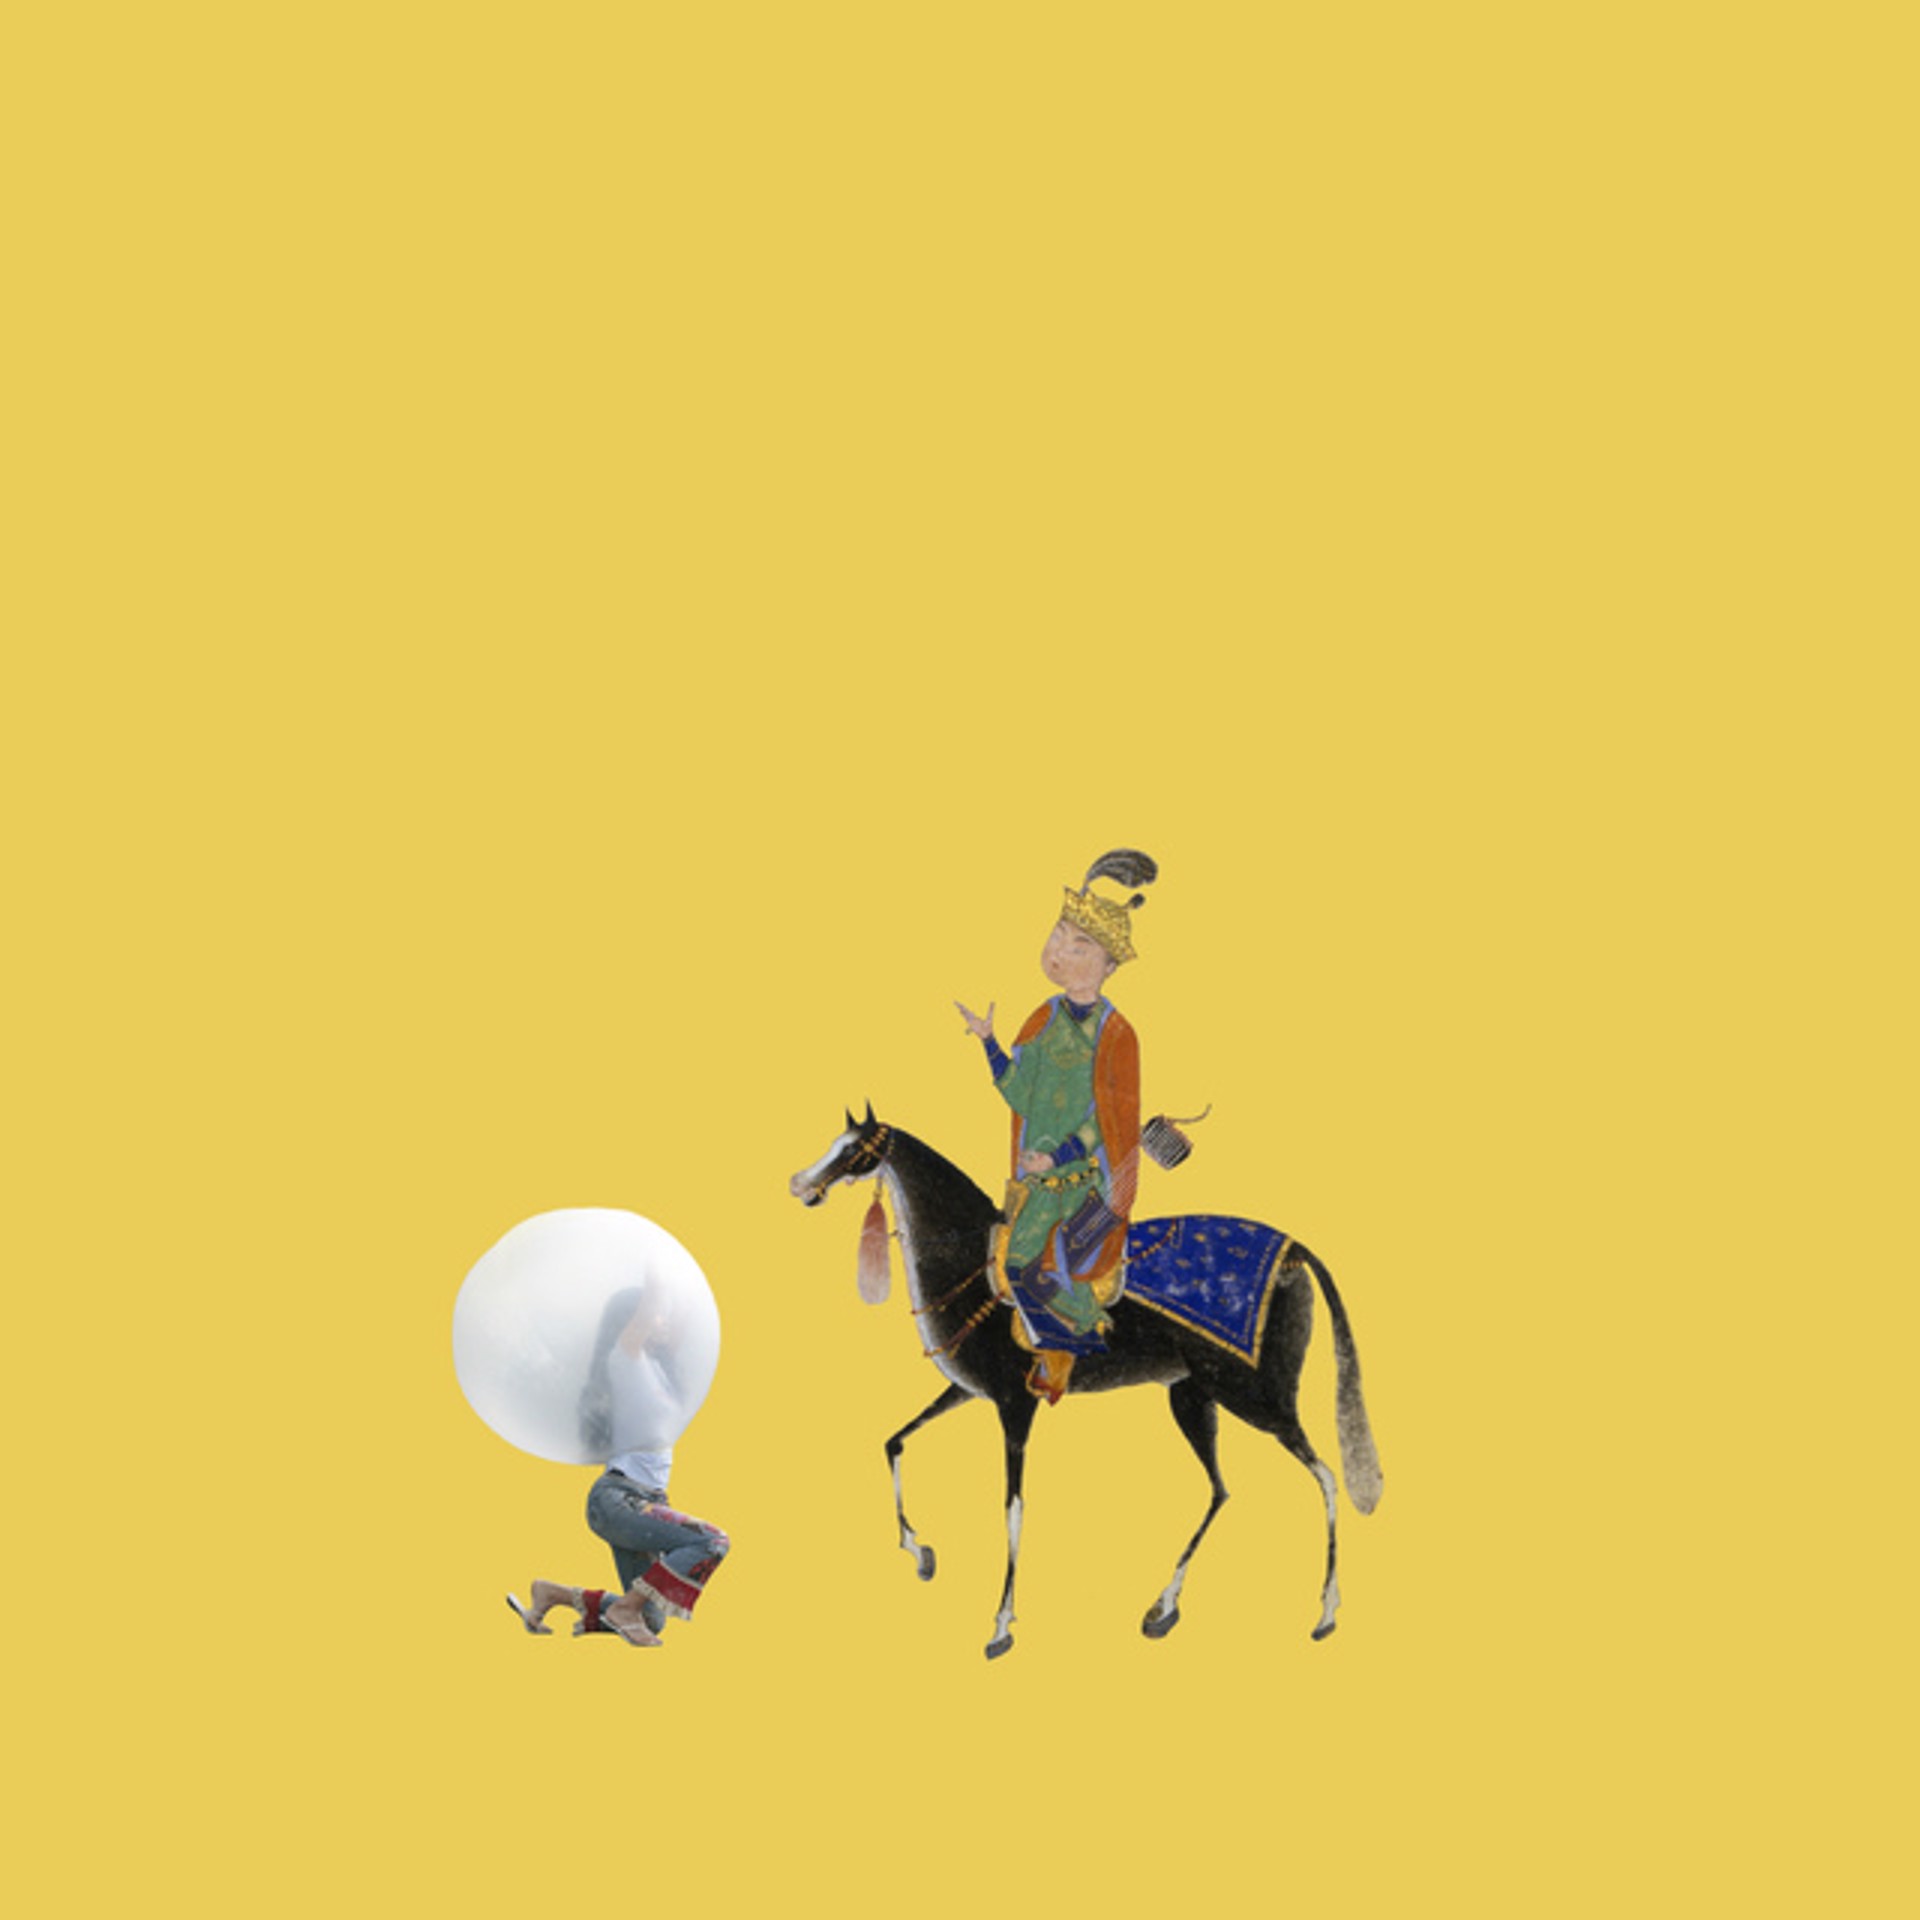 The Prince and the Balloon by Soody Sharifi